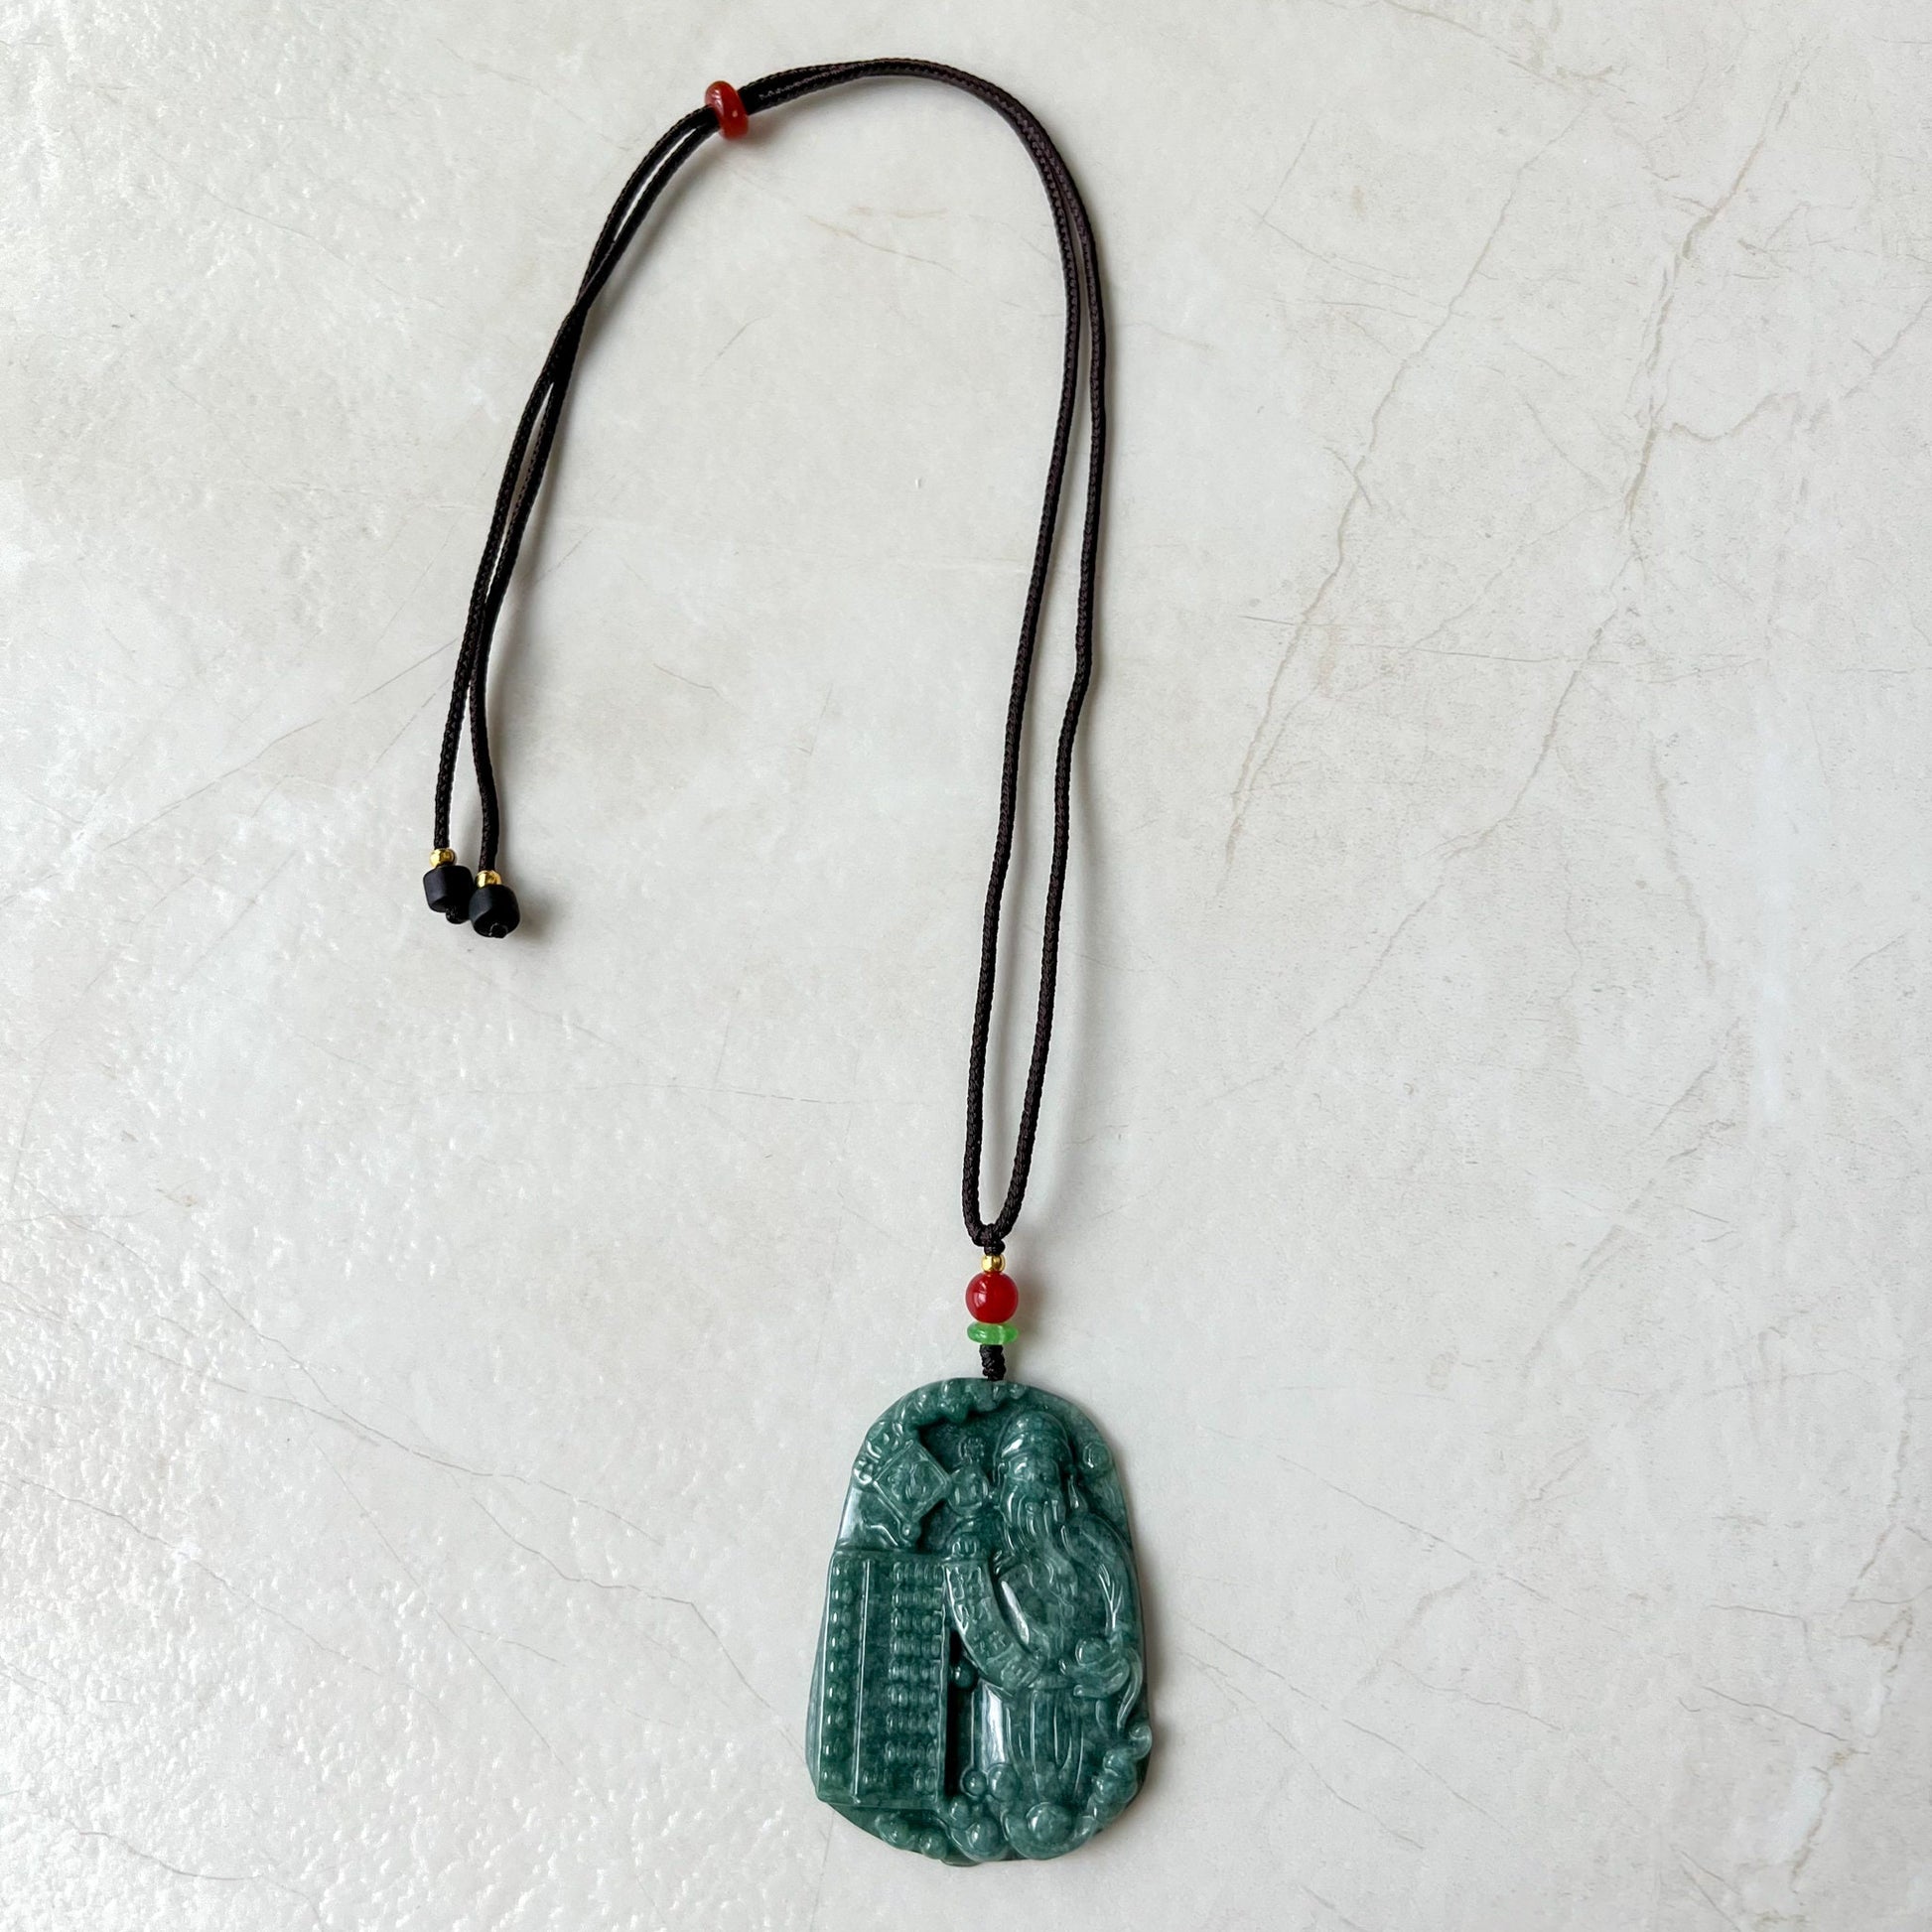 Green Jadeite Jade Fortune God, Caishen, God of Wealth, 财神, Hand Carved Pendant Necklace, YJ-0322-0405139 - AriaDesignCollection